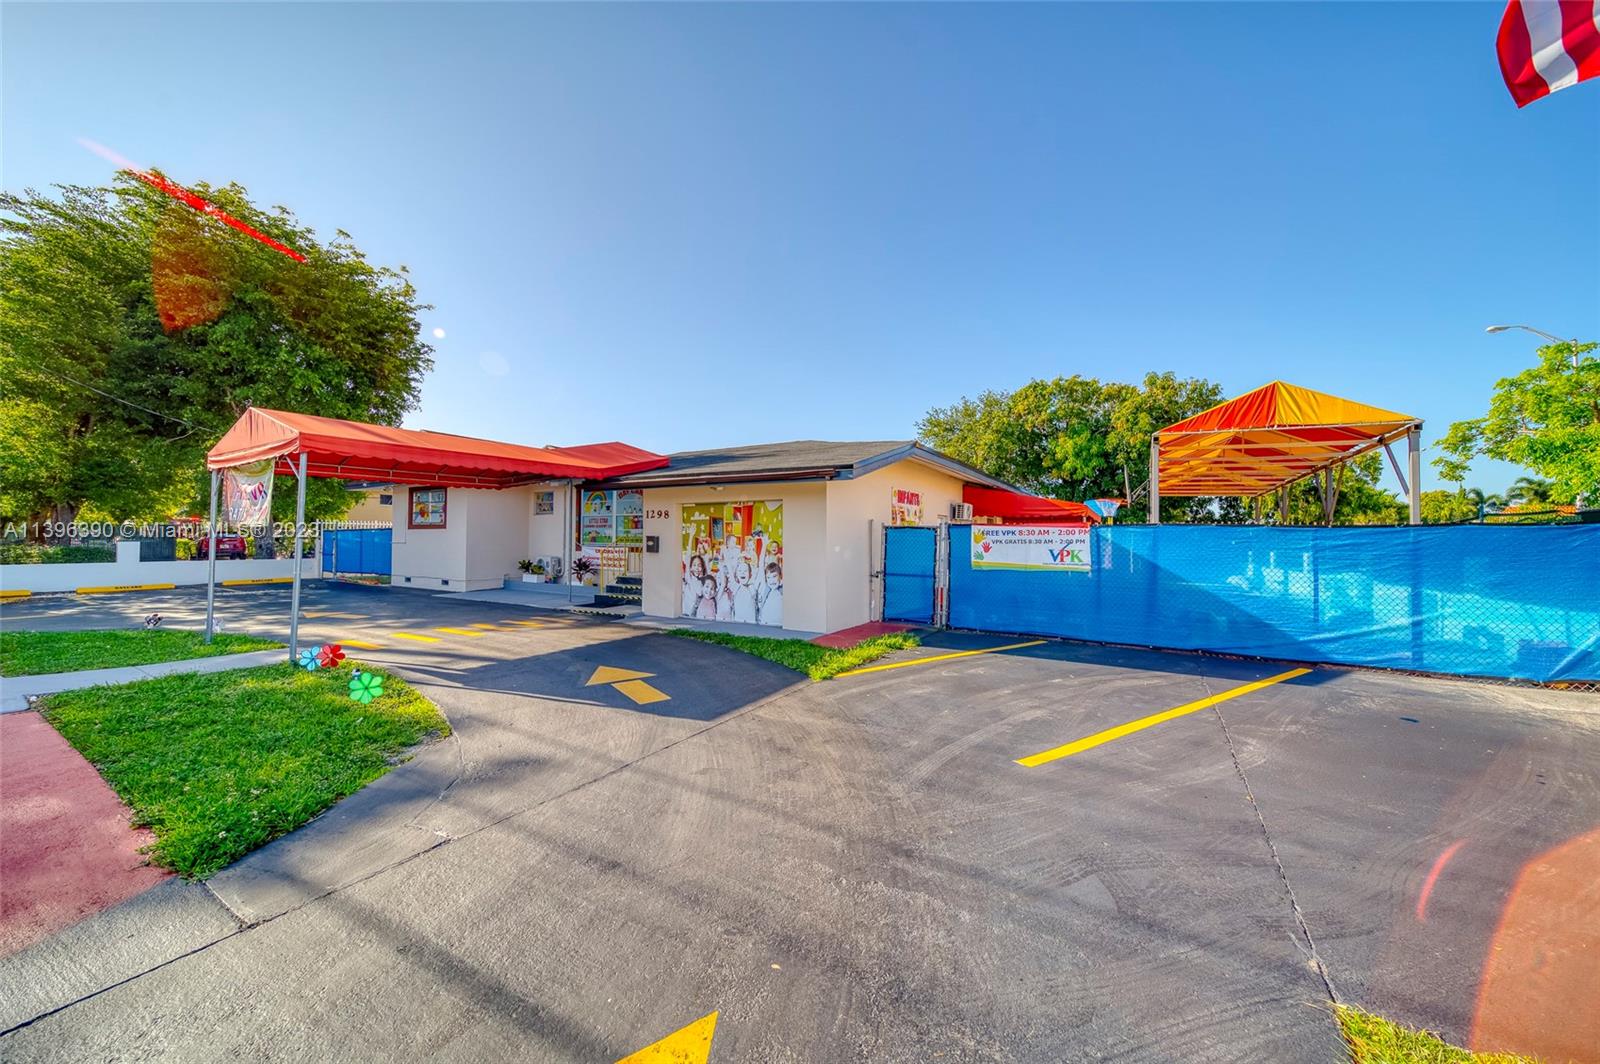   For Sale in Hialeah  For Sale A11396390, FL